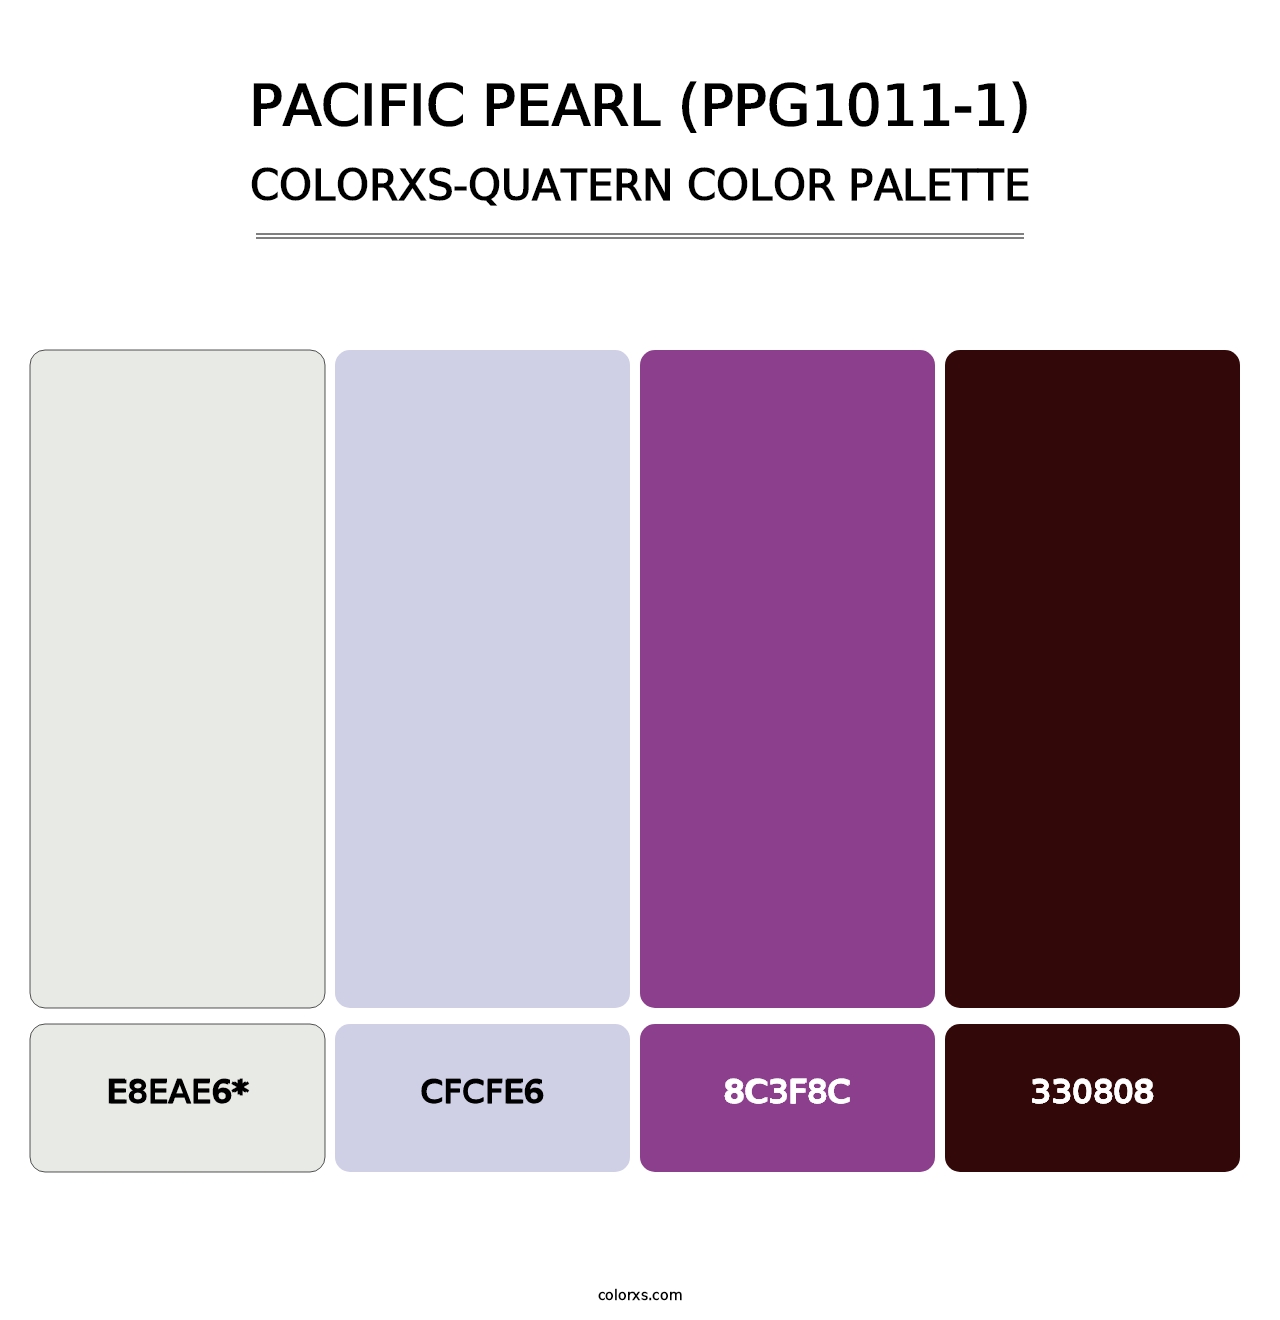 Pacific Pearl (PPG1011-1) - Colorxs Quatern Palette